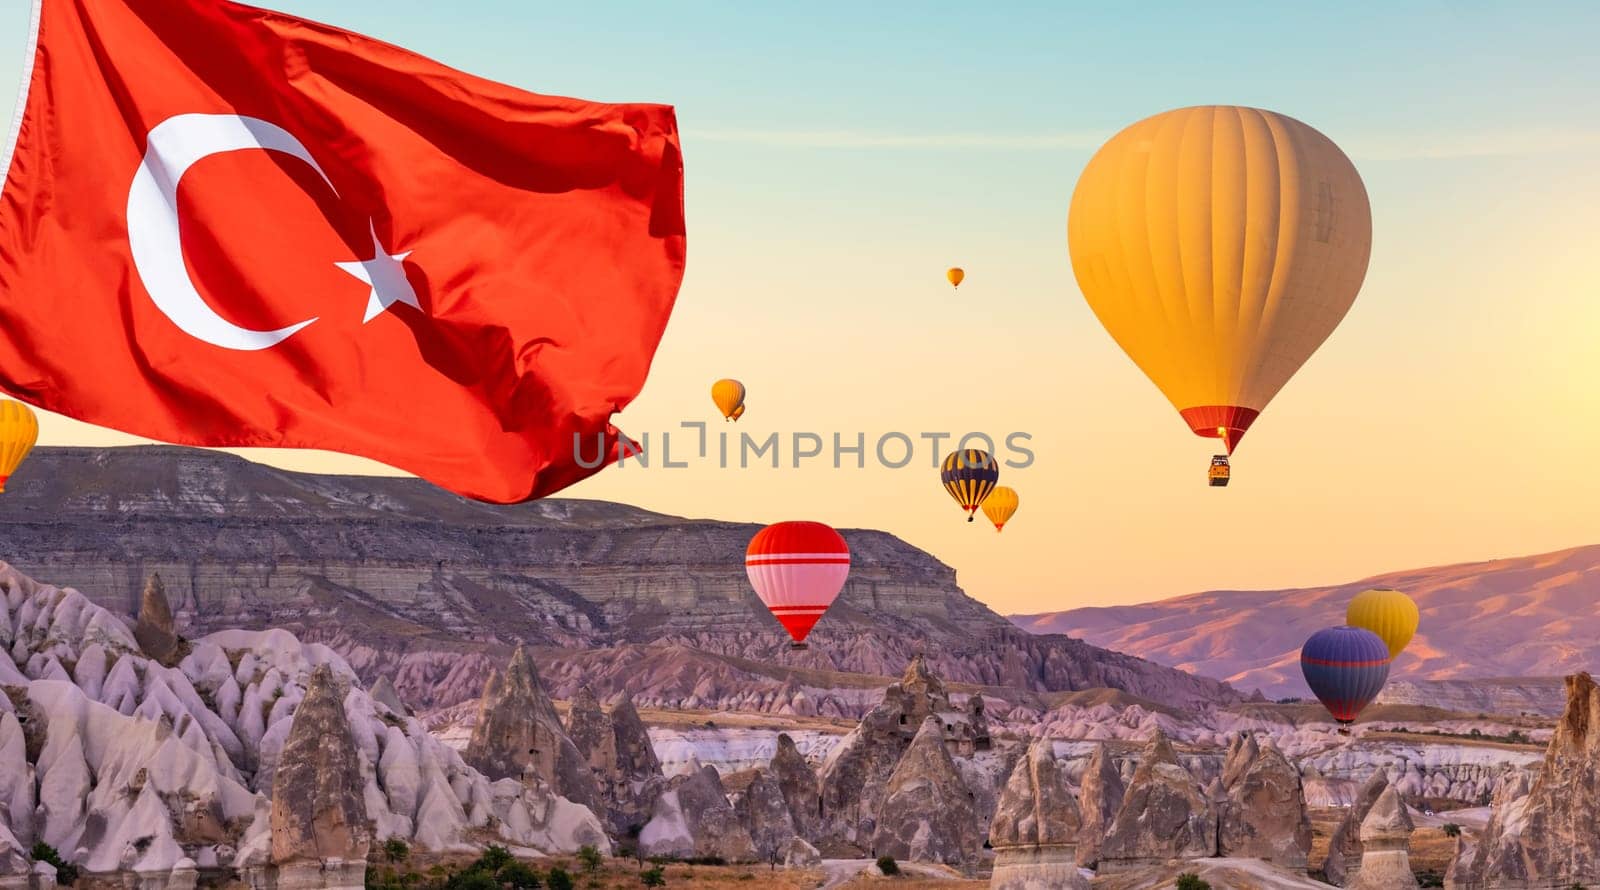 Turkey flag against hot air balloons in sunset sky floating over mountains